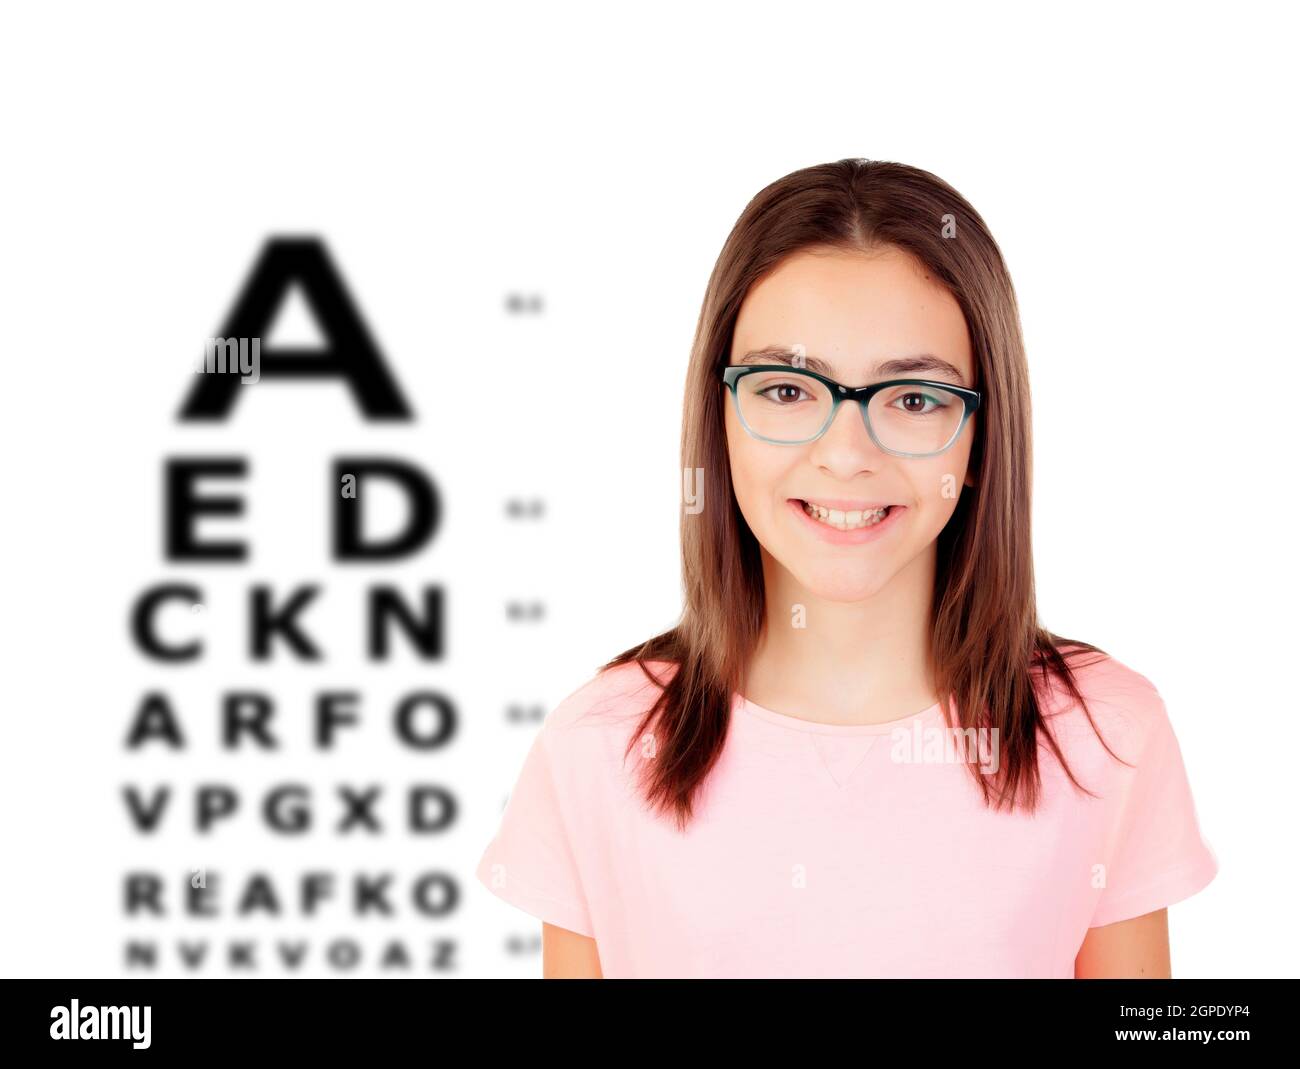 Adorable teenager girl with glasses checking her view Stock Photo